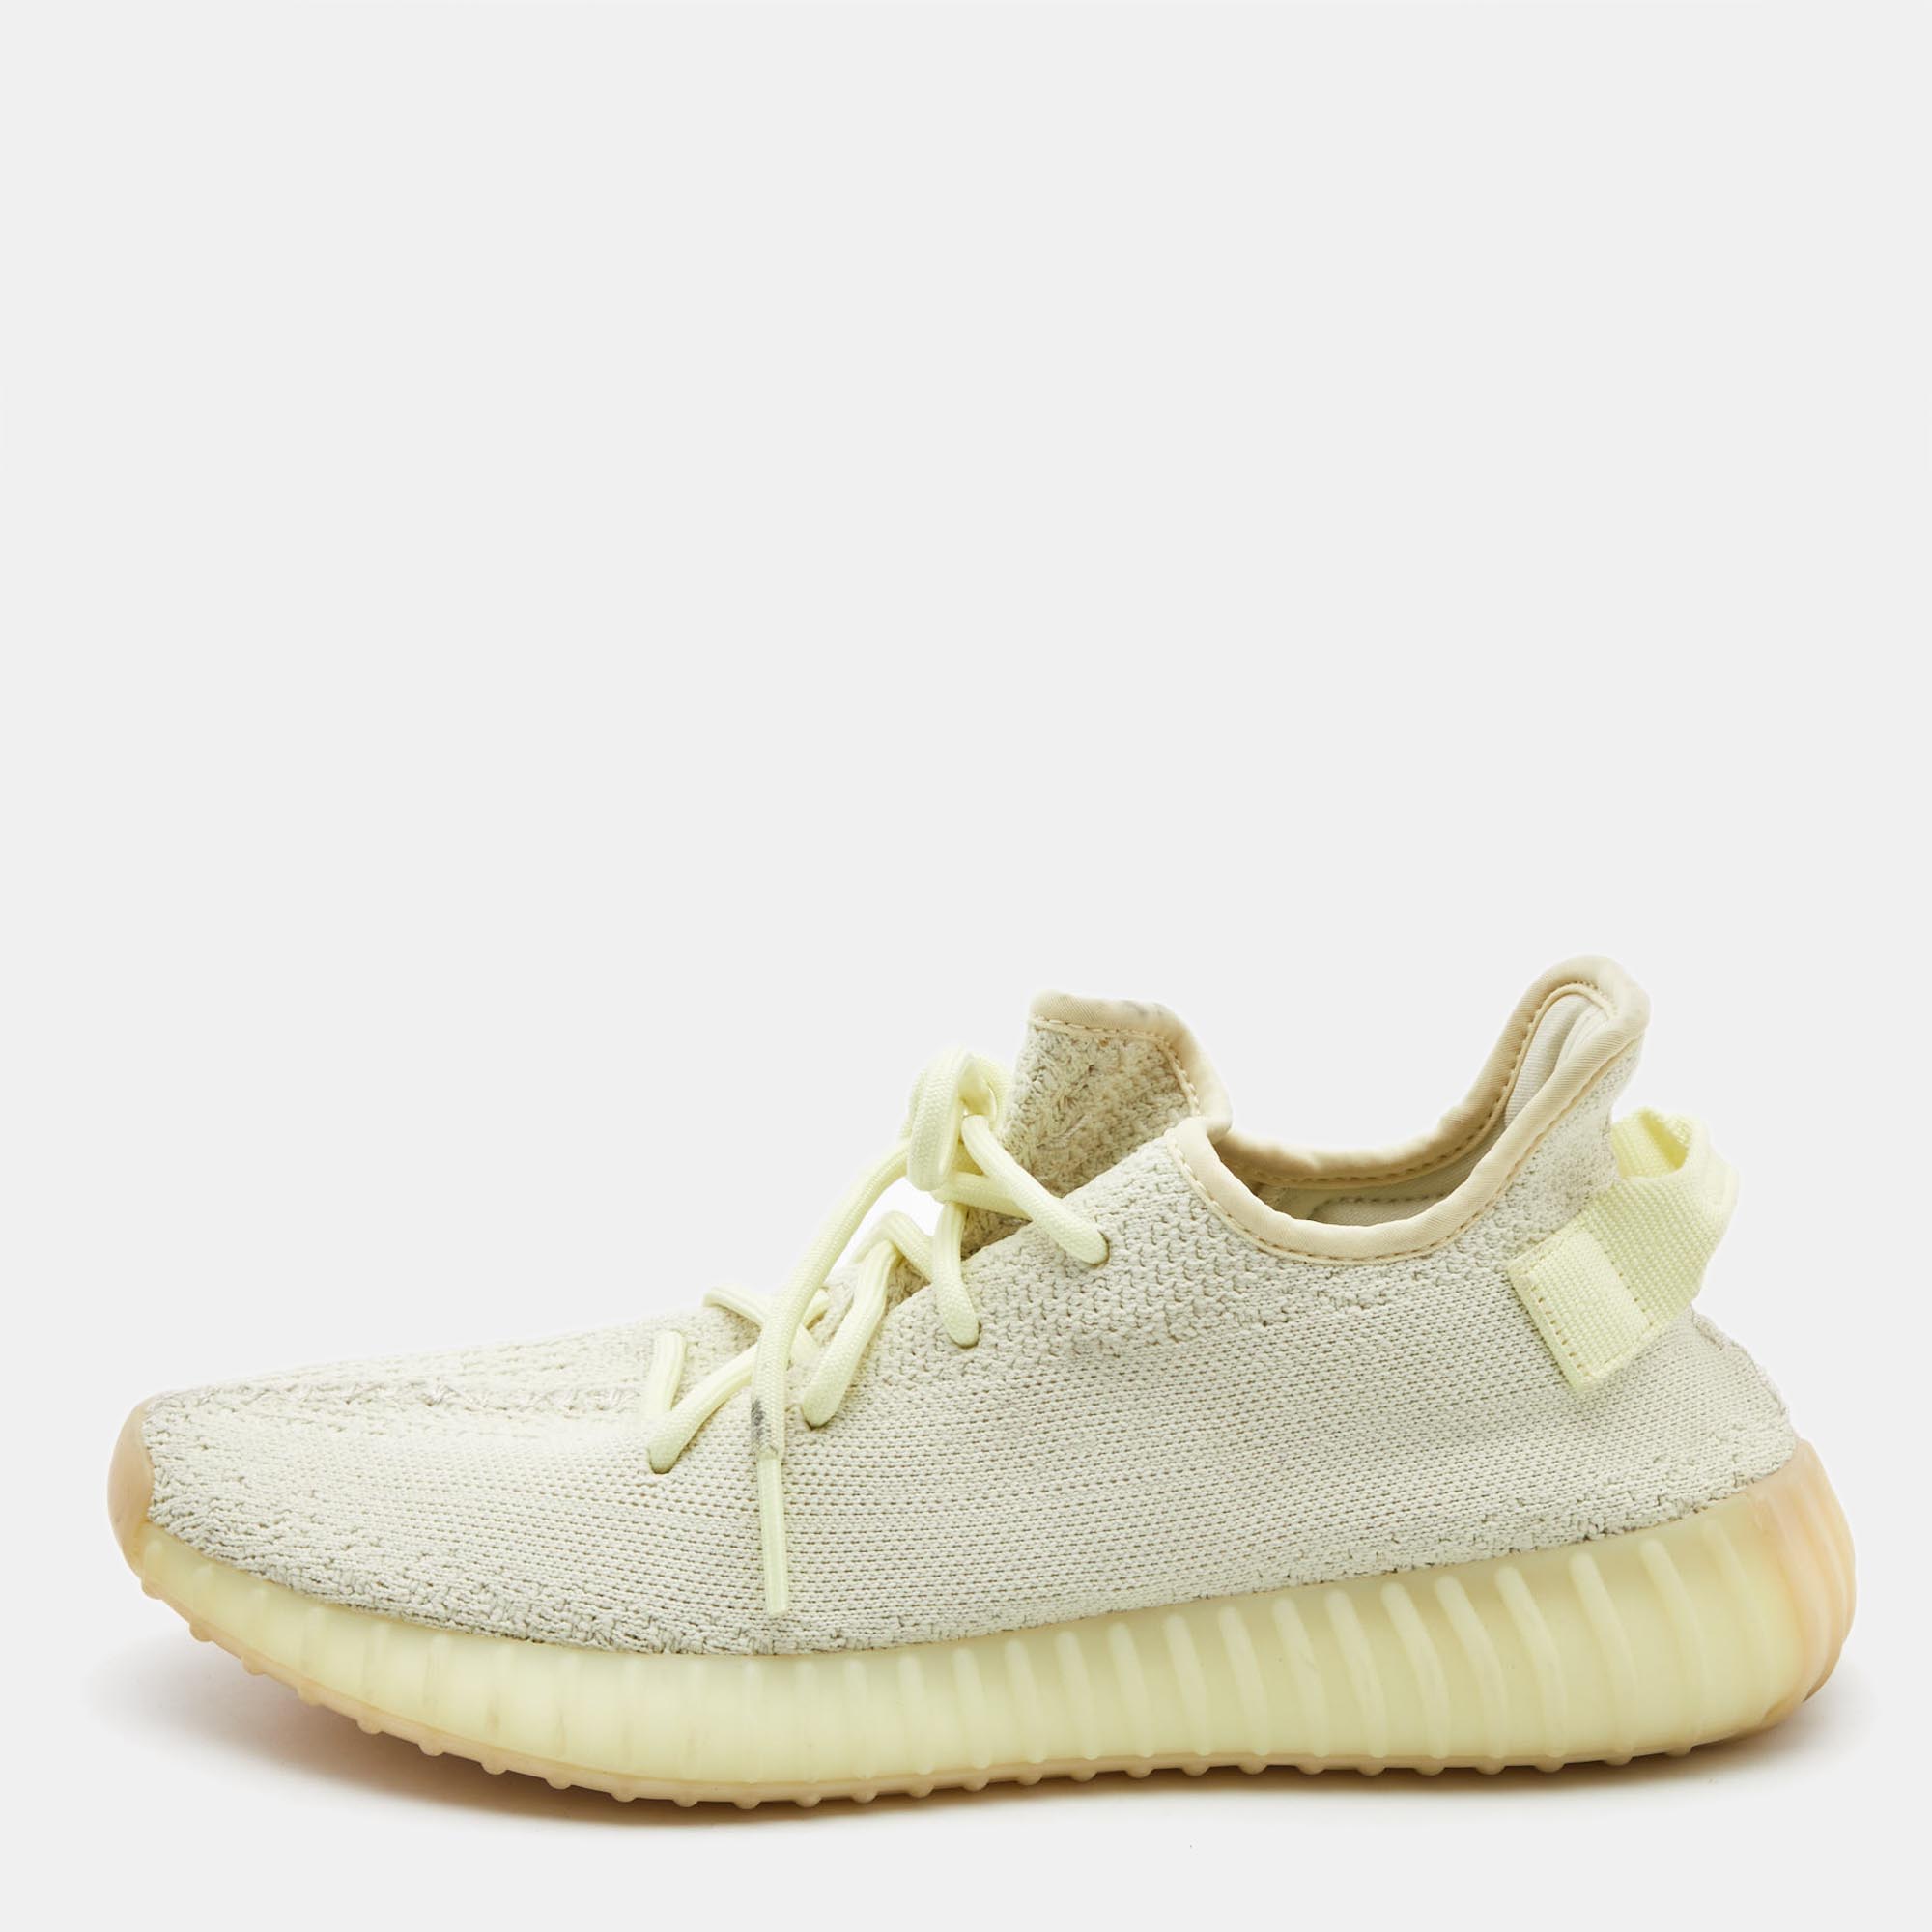 Pre-owned Yeezy X Adidas Light Yellow Knit Fabric Boost 350 V2 Butter Sneakers Size 41 1/3